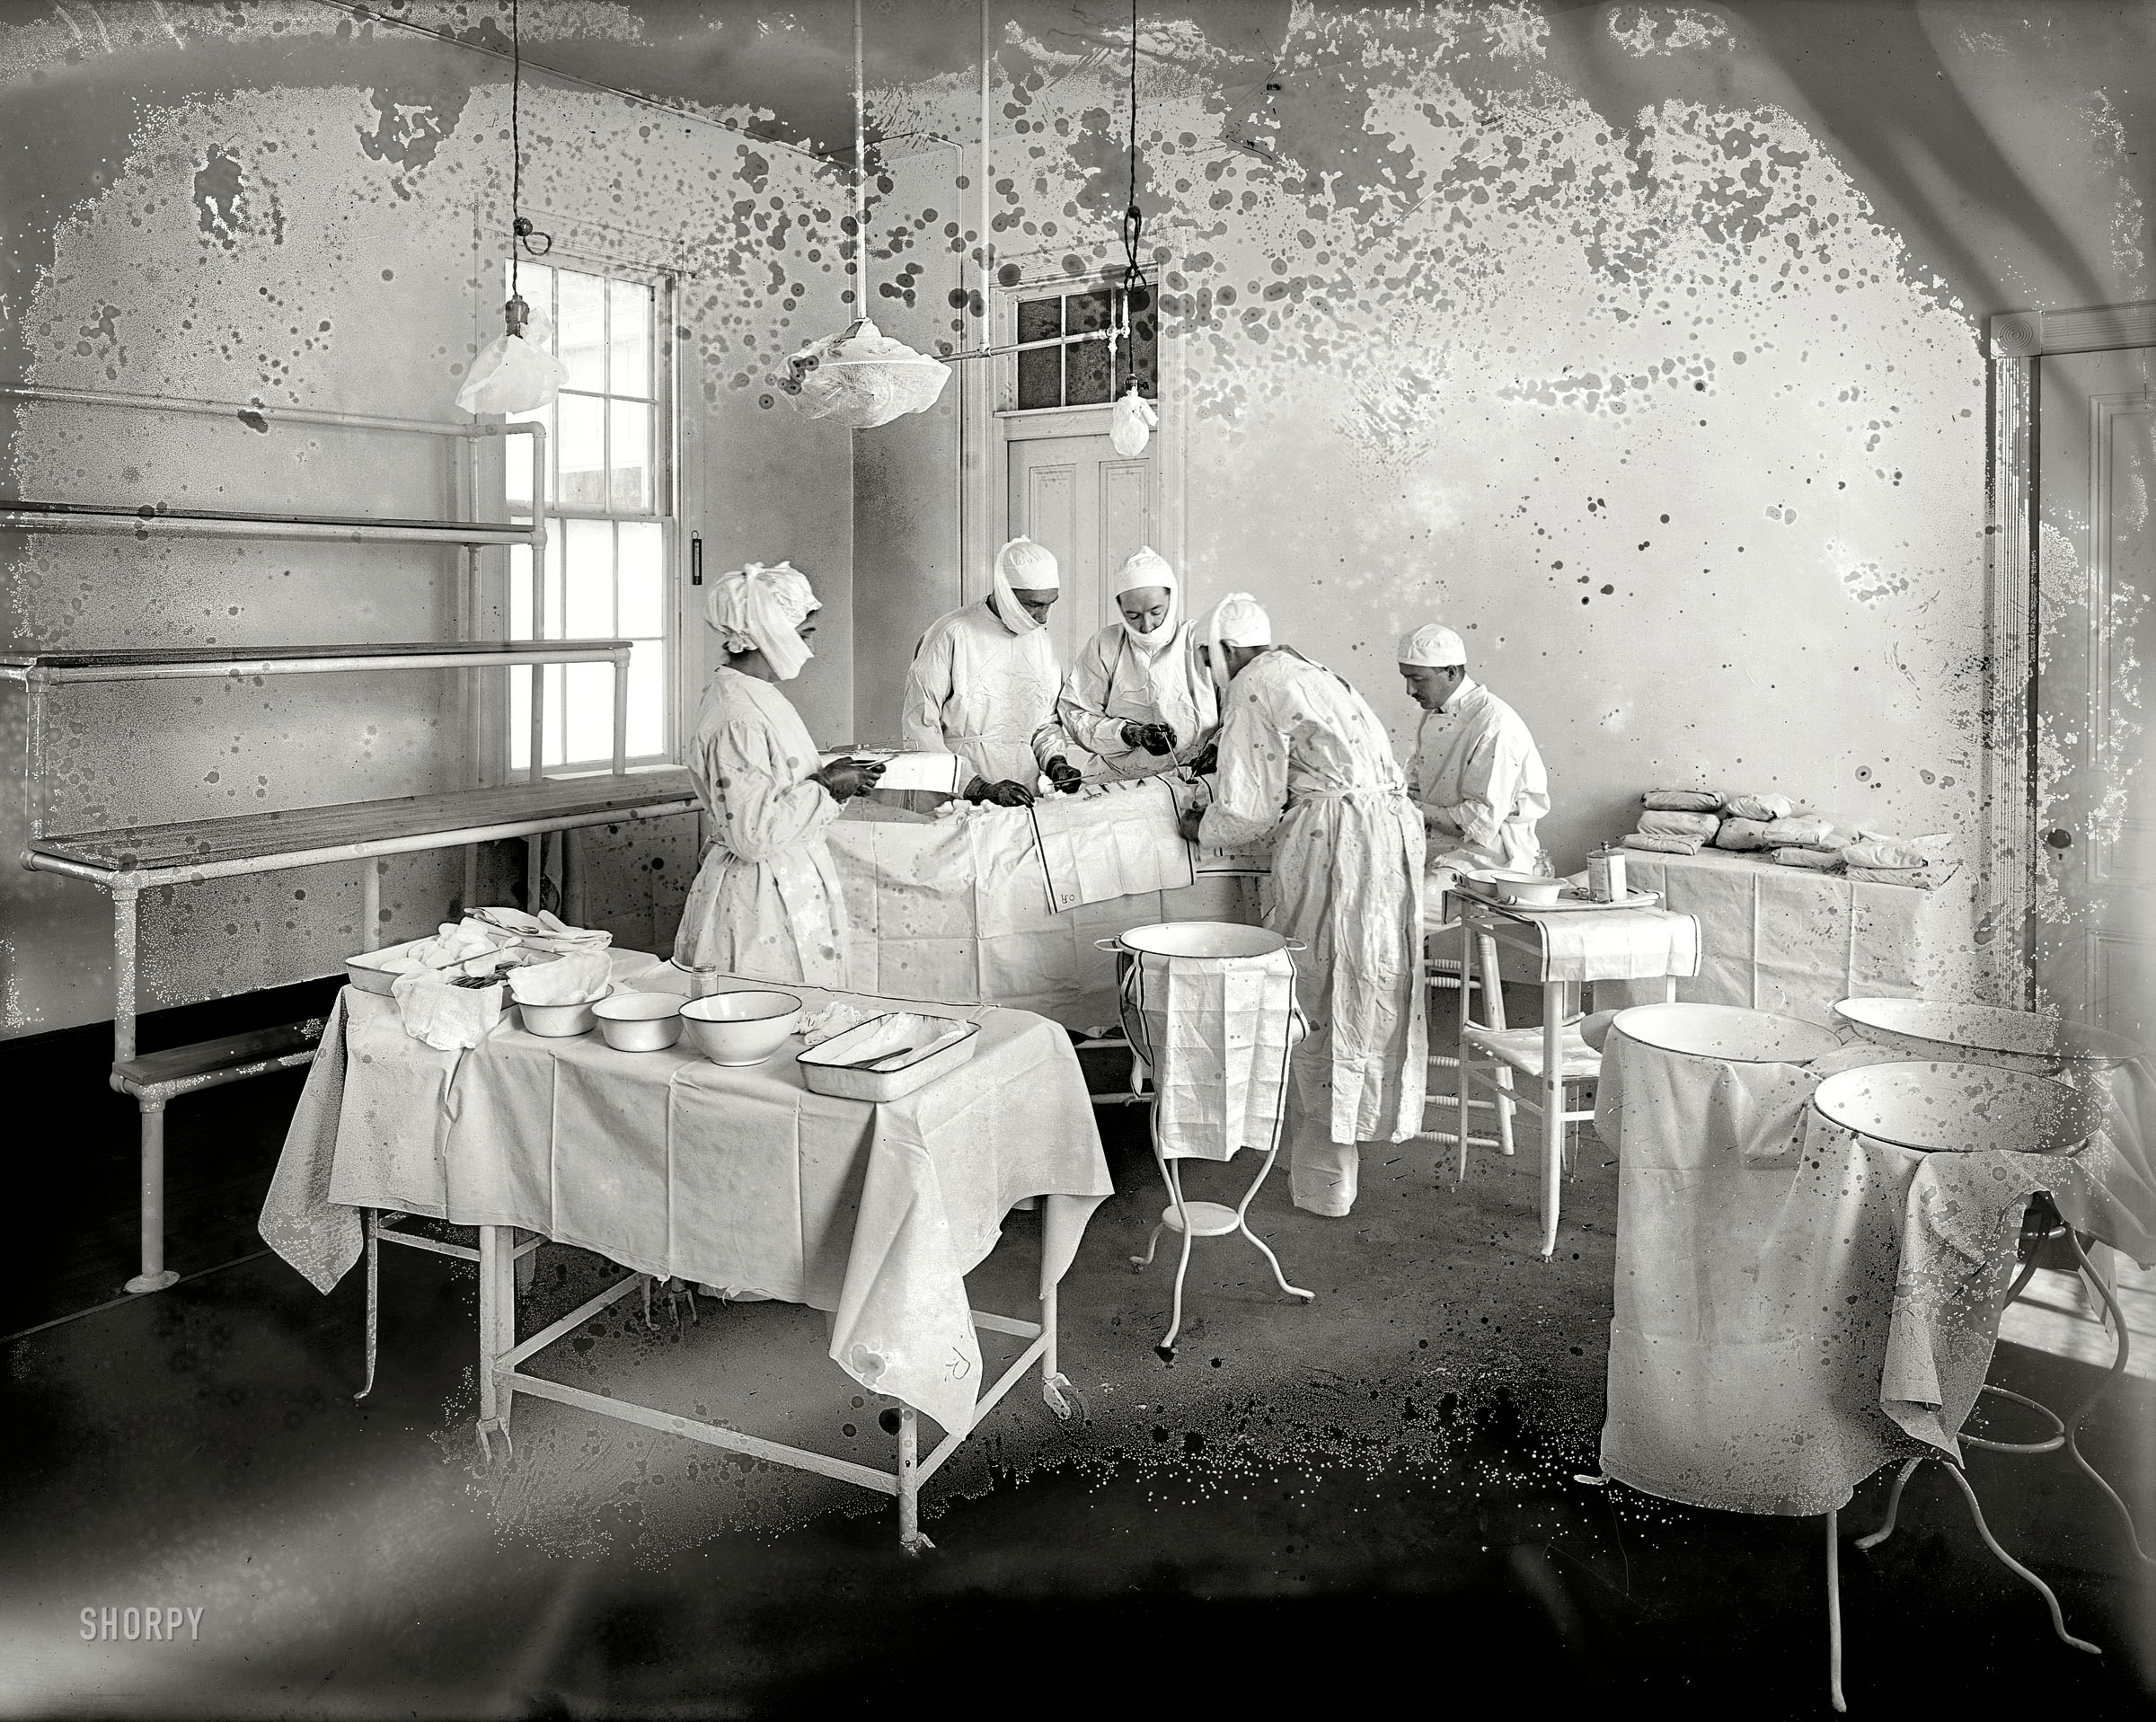 March 16, 1915. "Operating Room, Washington Asylum Hospital." More sanitary, one hopes, than the moldy glass plate recording the scene. View full size.